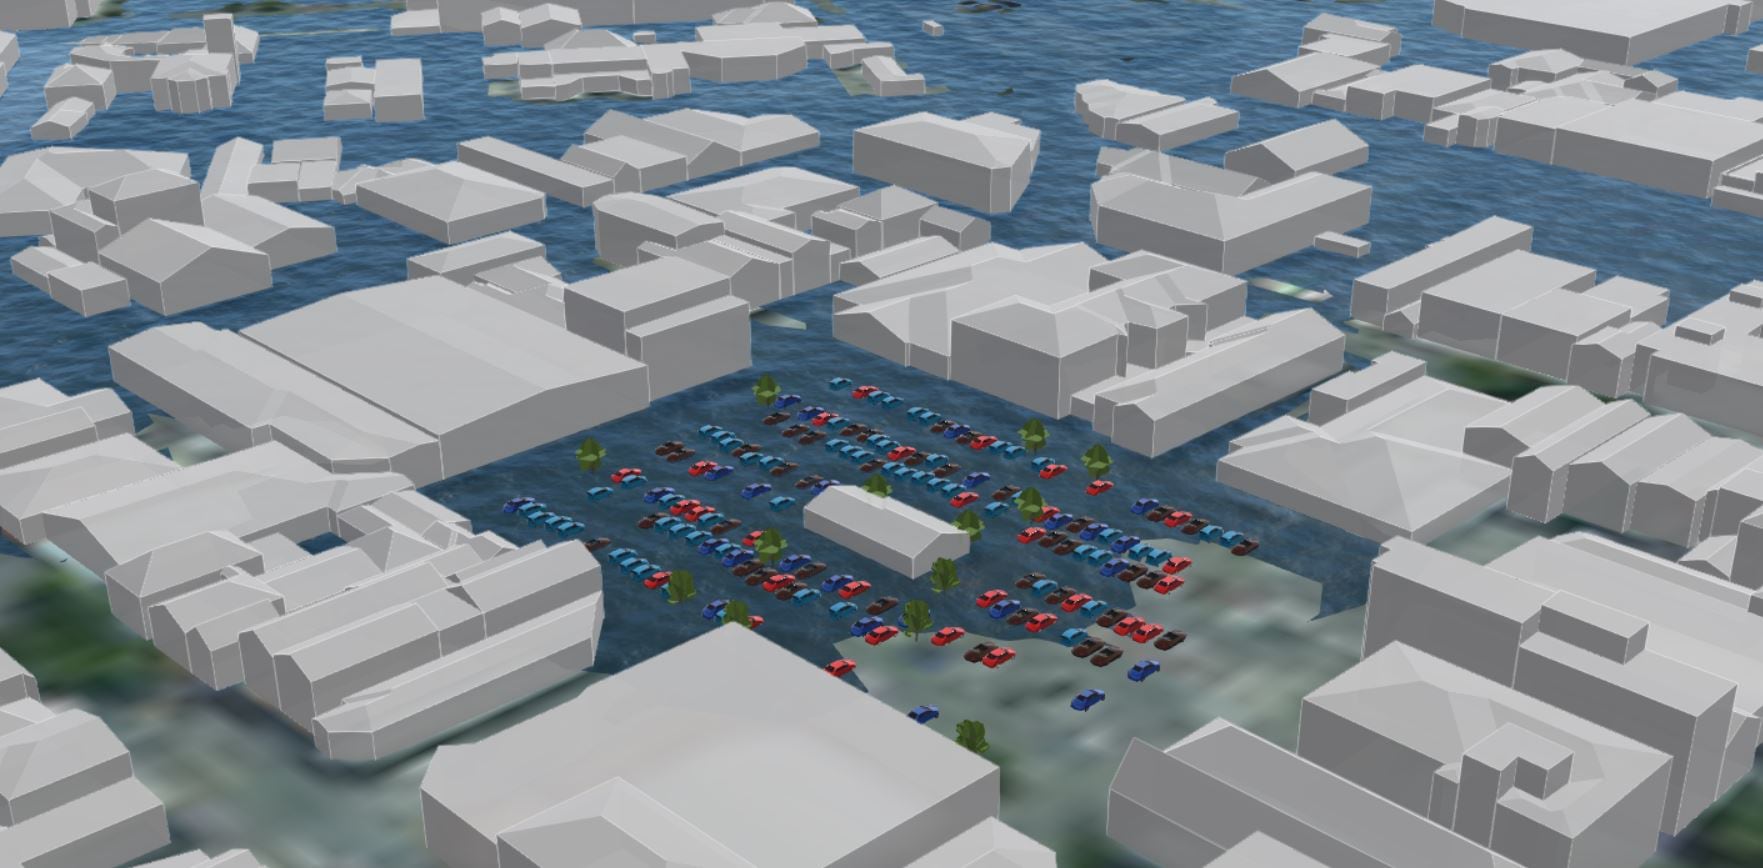 A 3D rendering of sea level rise over time, with Nelson partially under water in future projections